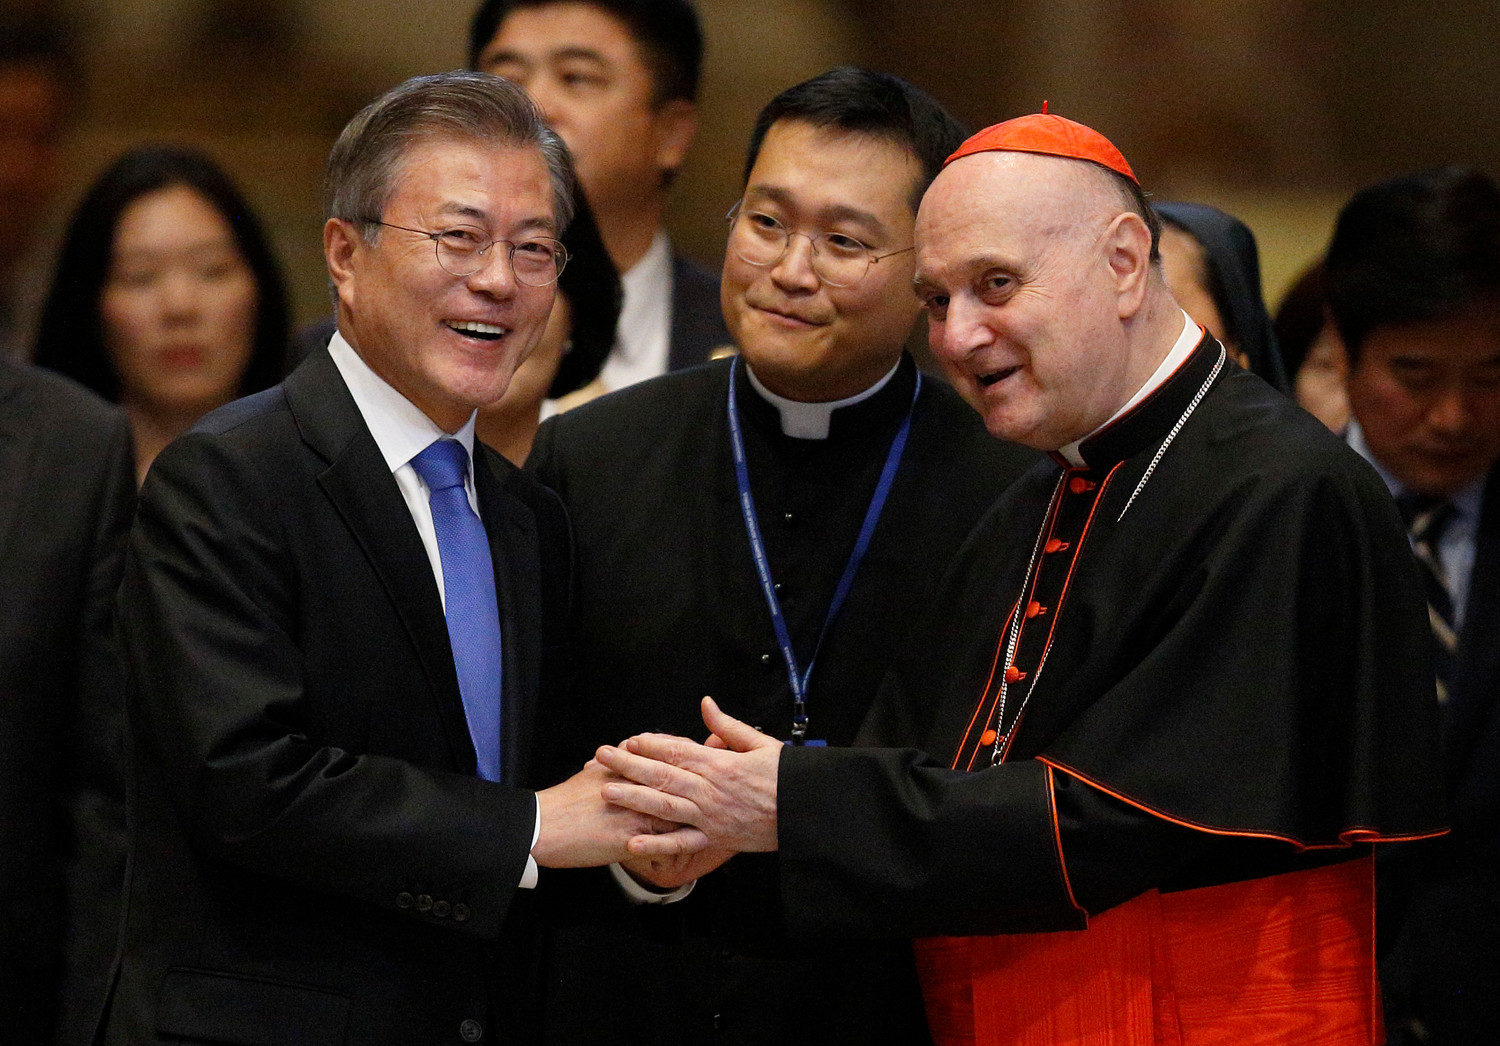 South Korean President Moon Jae-in greets Cardinal Angelo Comastri, archpriest of St. Peter’s Basilica, before a Mass for peace for the Korean peninsula in St. Peter’s Basilica at the Vatican Oct. 17. The Mass was celebrated by Cardinal Pietro Parolin, Vatican secretary of state.